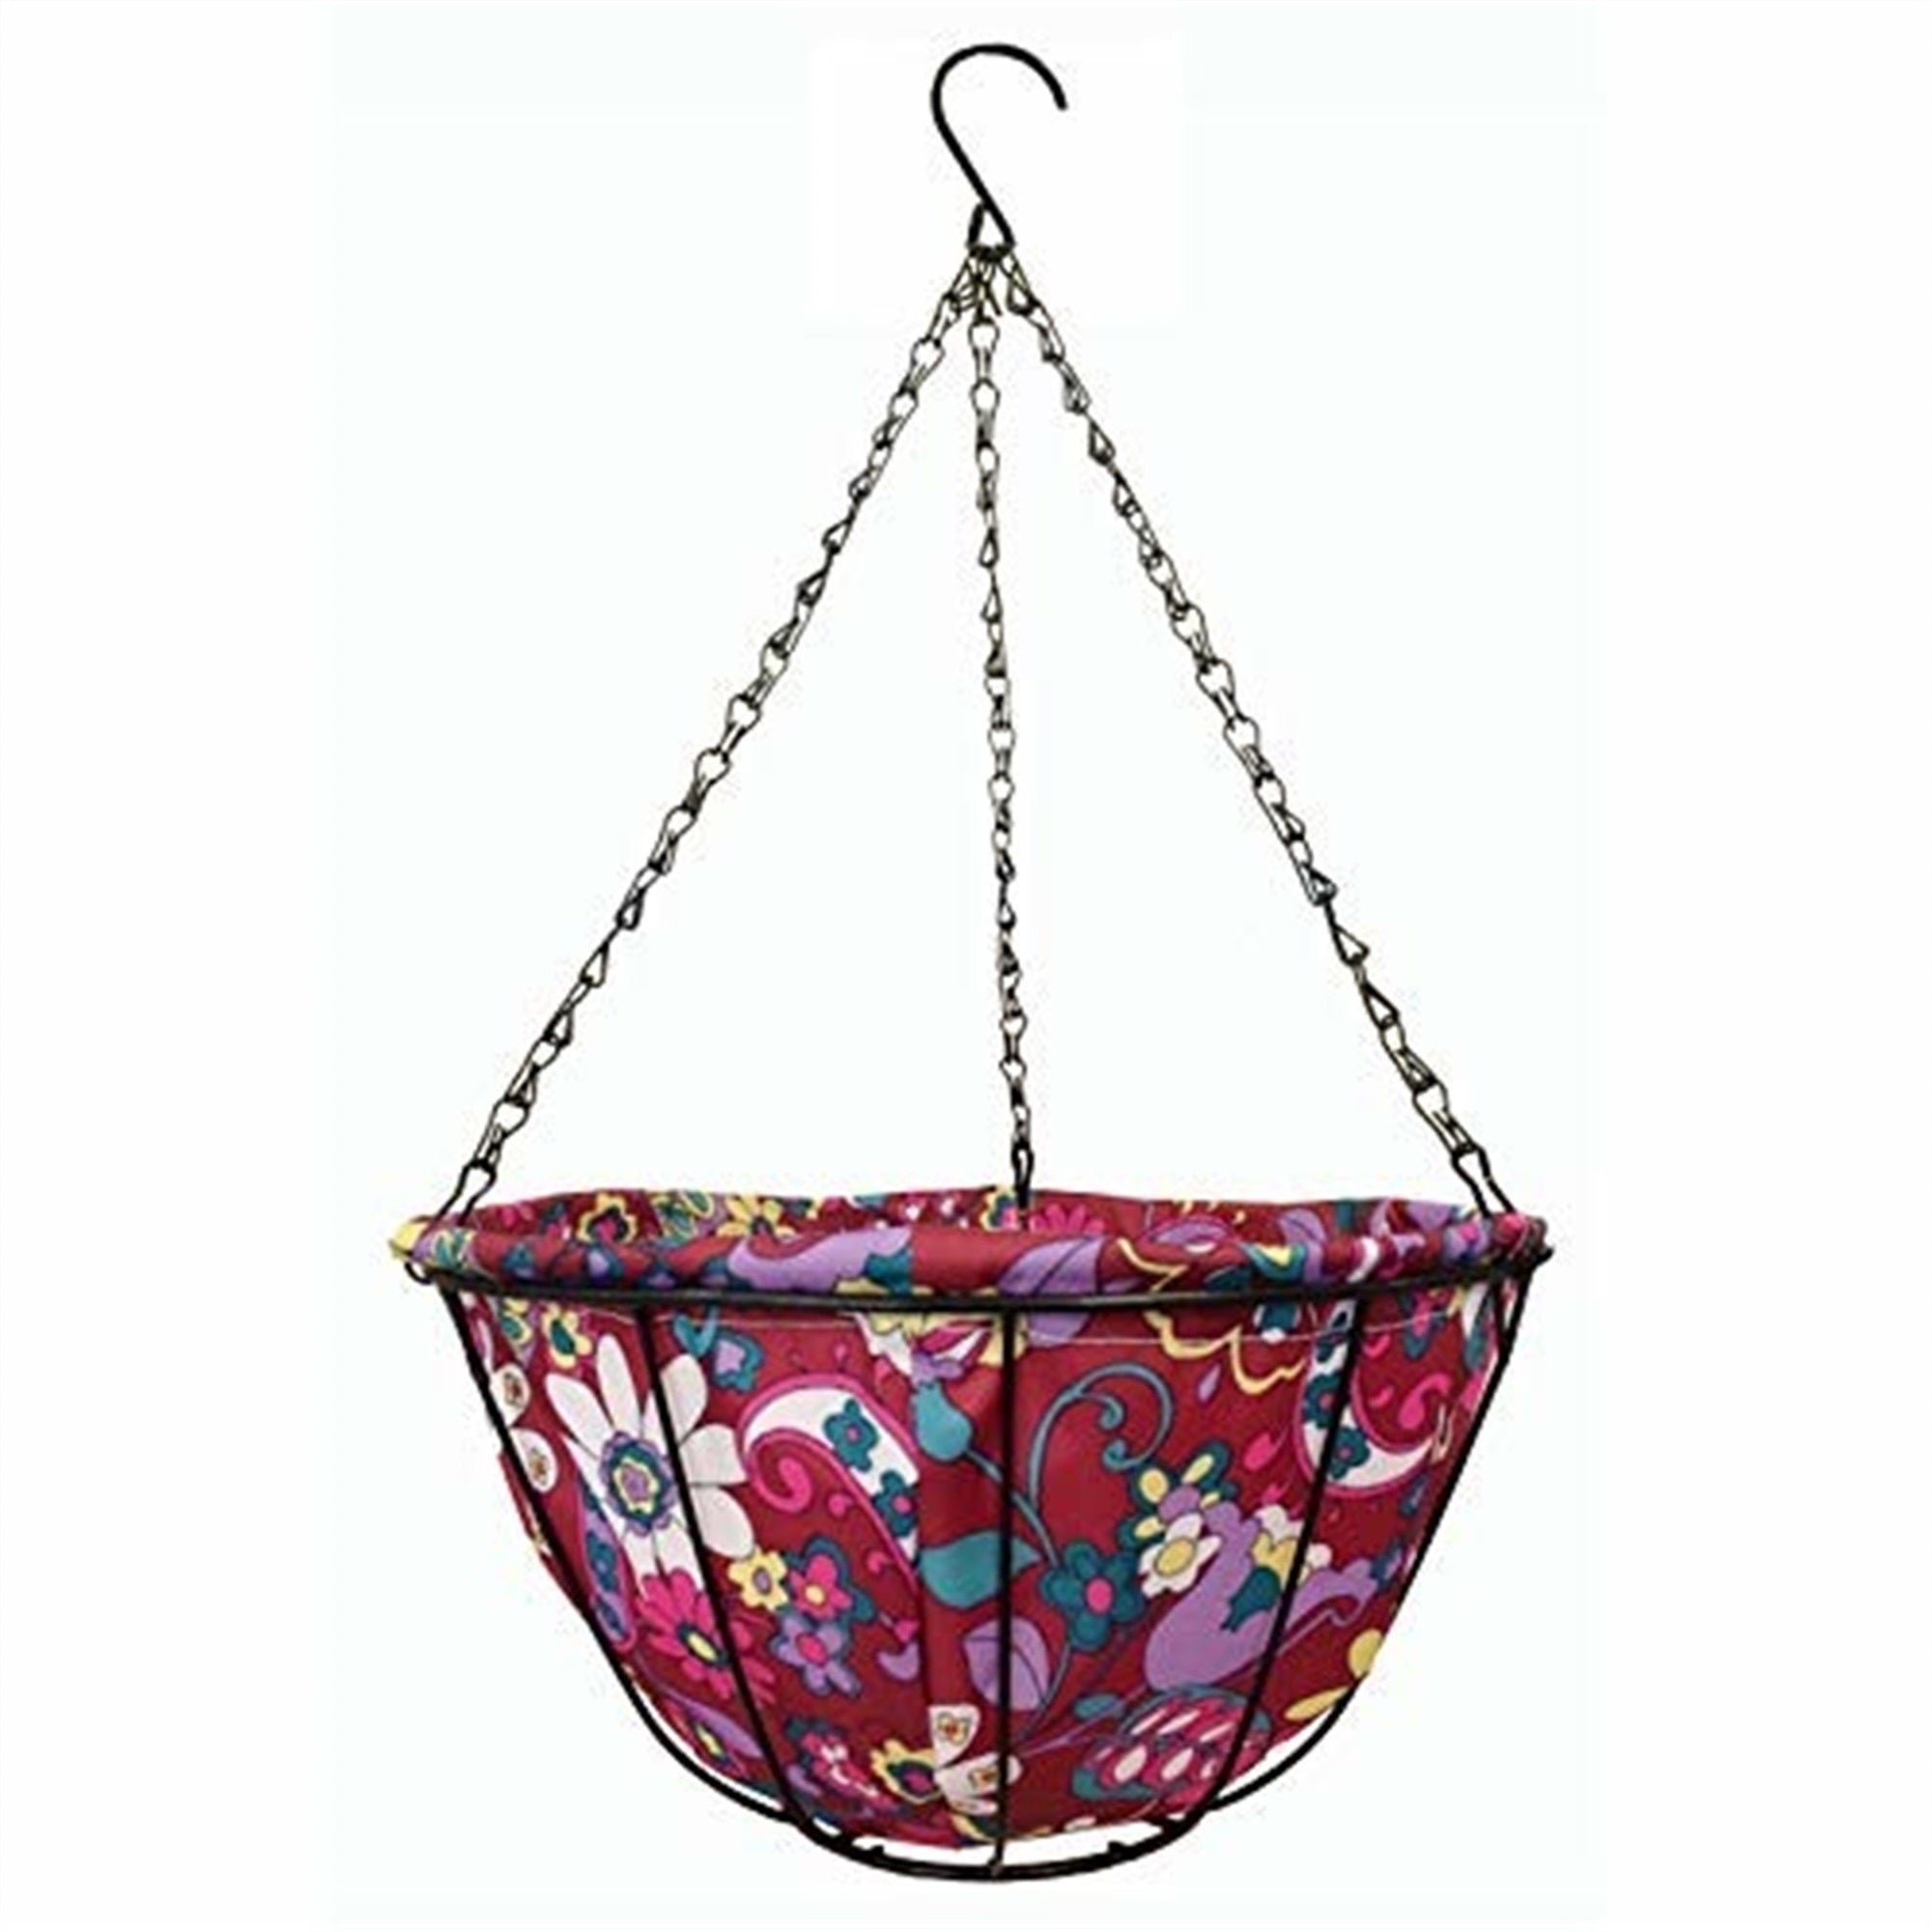 Gardener Select Hanging Basket with Fabric Coco Liner, Red/Purple, 12"